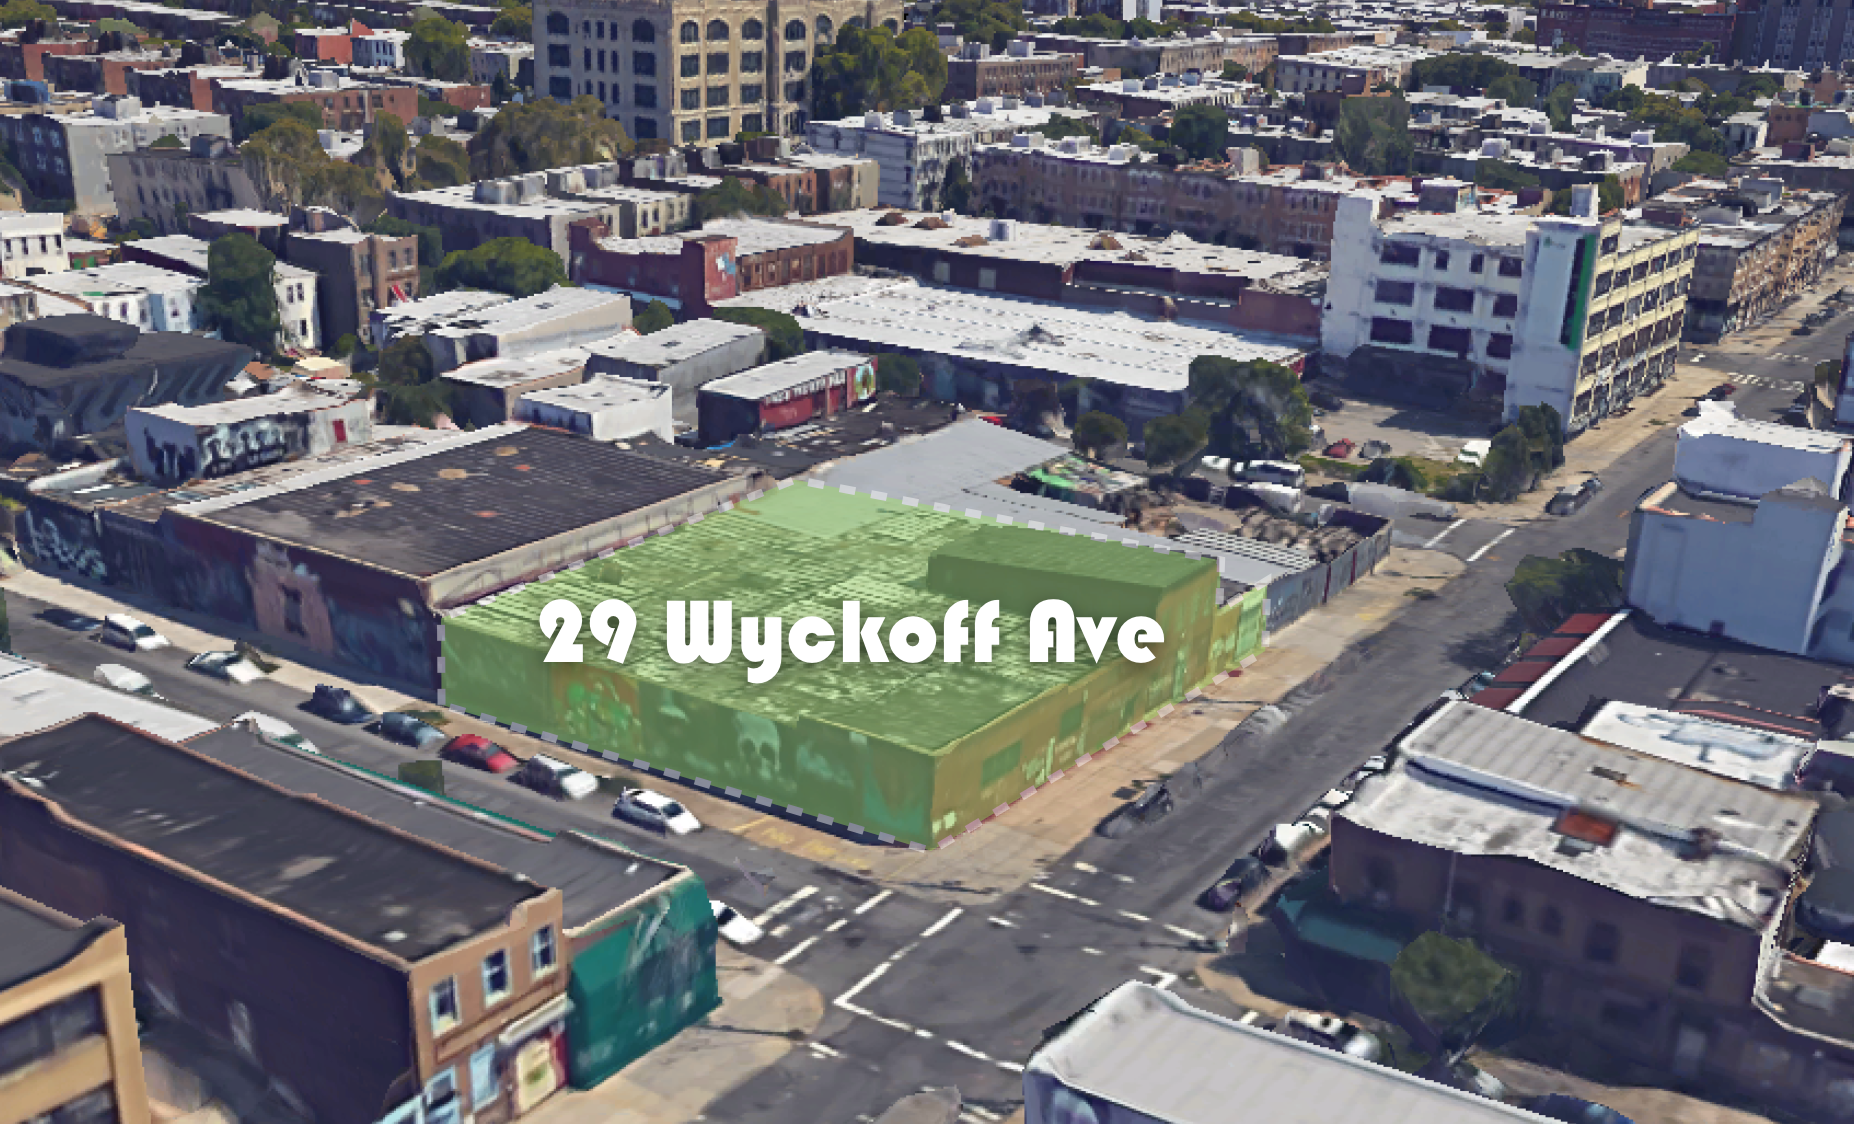 Copy of Aerial View of 29 Wyckoff Ave Brooklyn